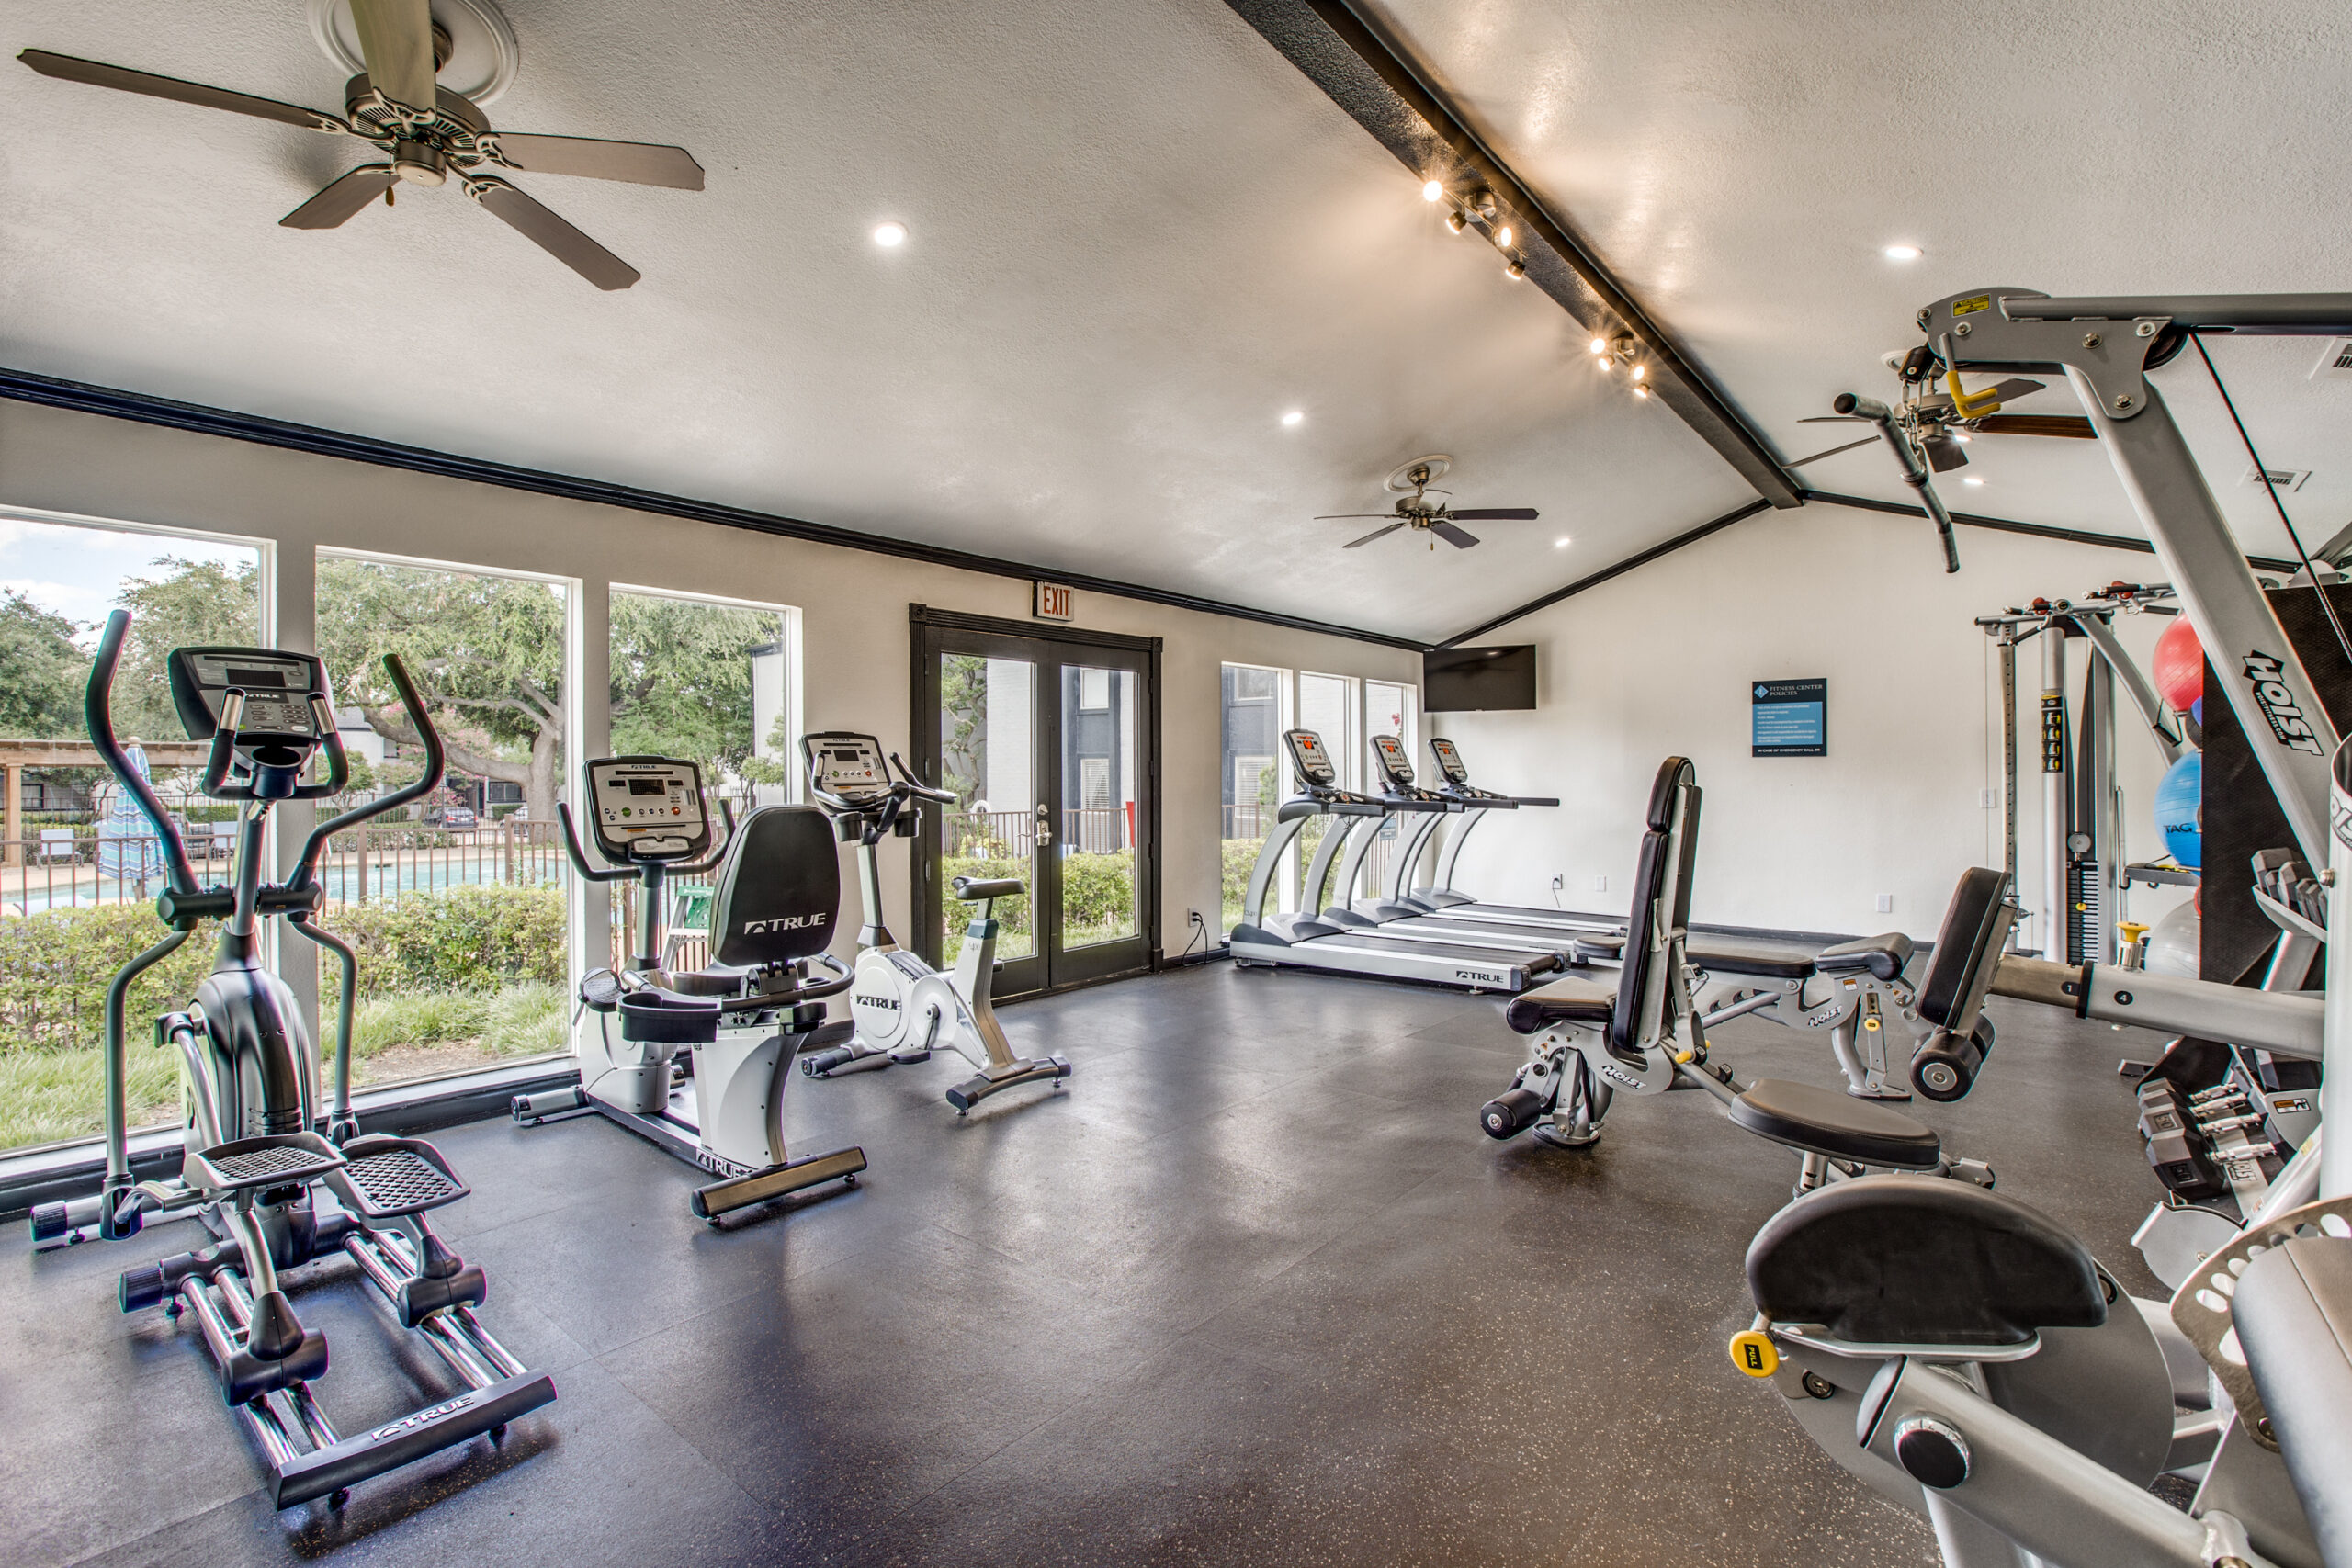 24-hour fitness center with pleny of workout equipment